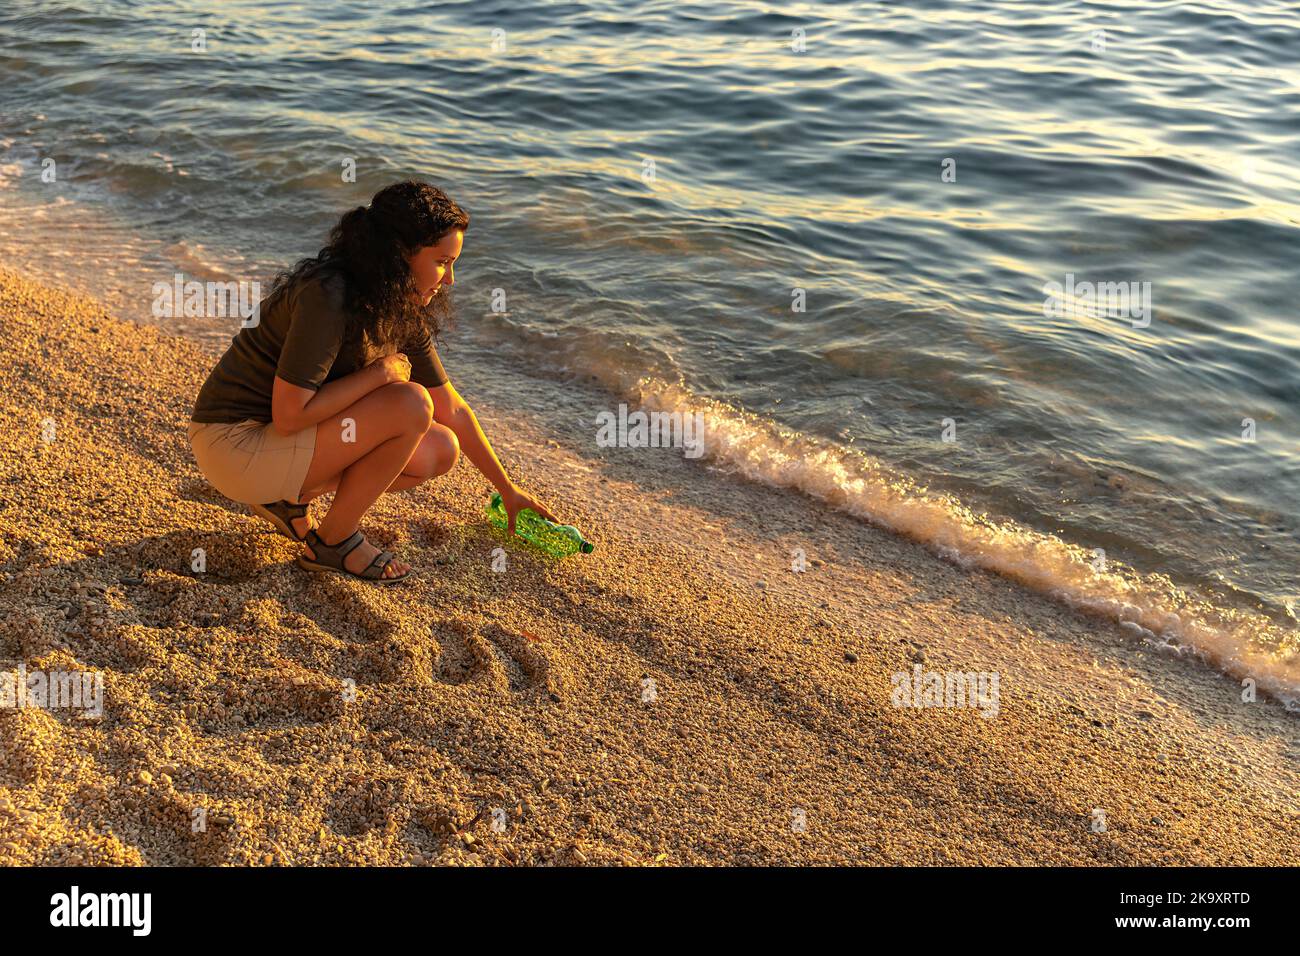 Earth day. Cleanup garbage on the Adriatic sea coast. A girl picking up a plastic bottle on the beach. Sunset. The concept  of conservation of ecology Stock Photo